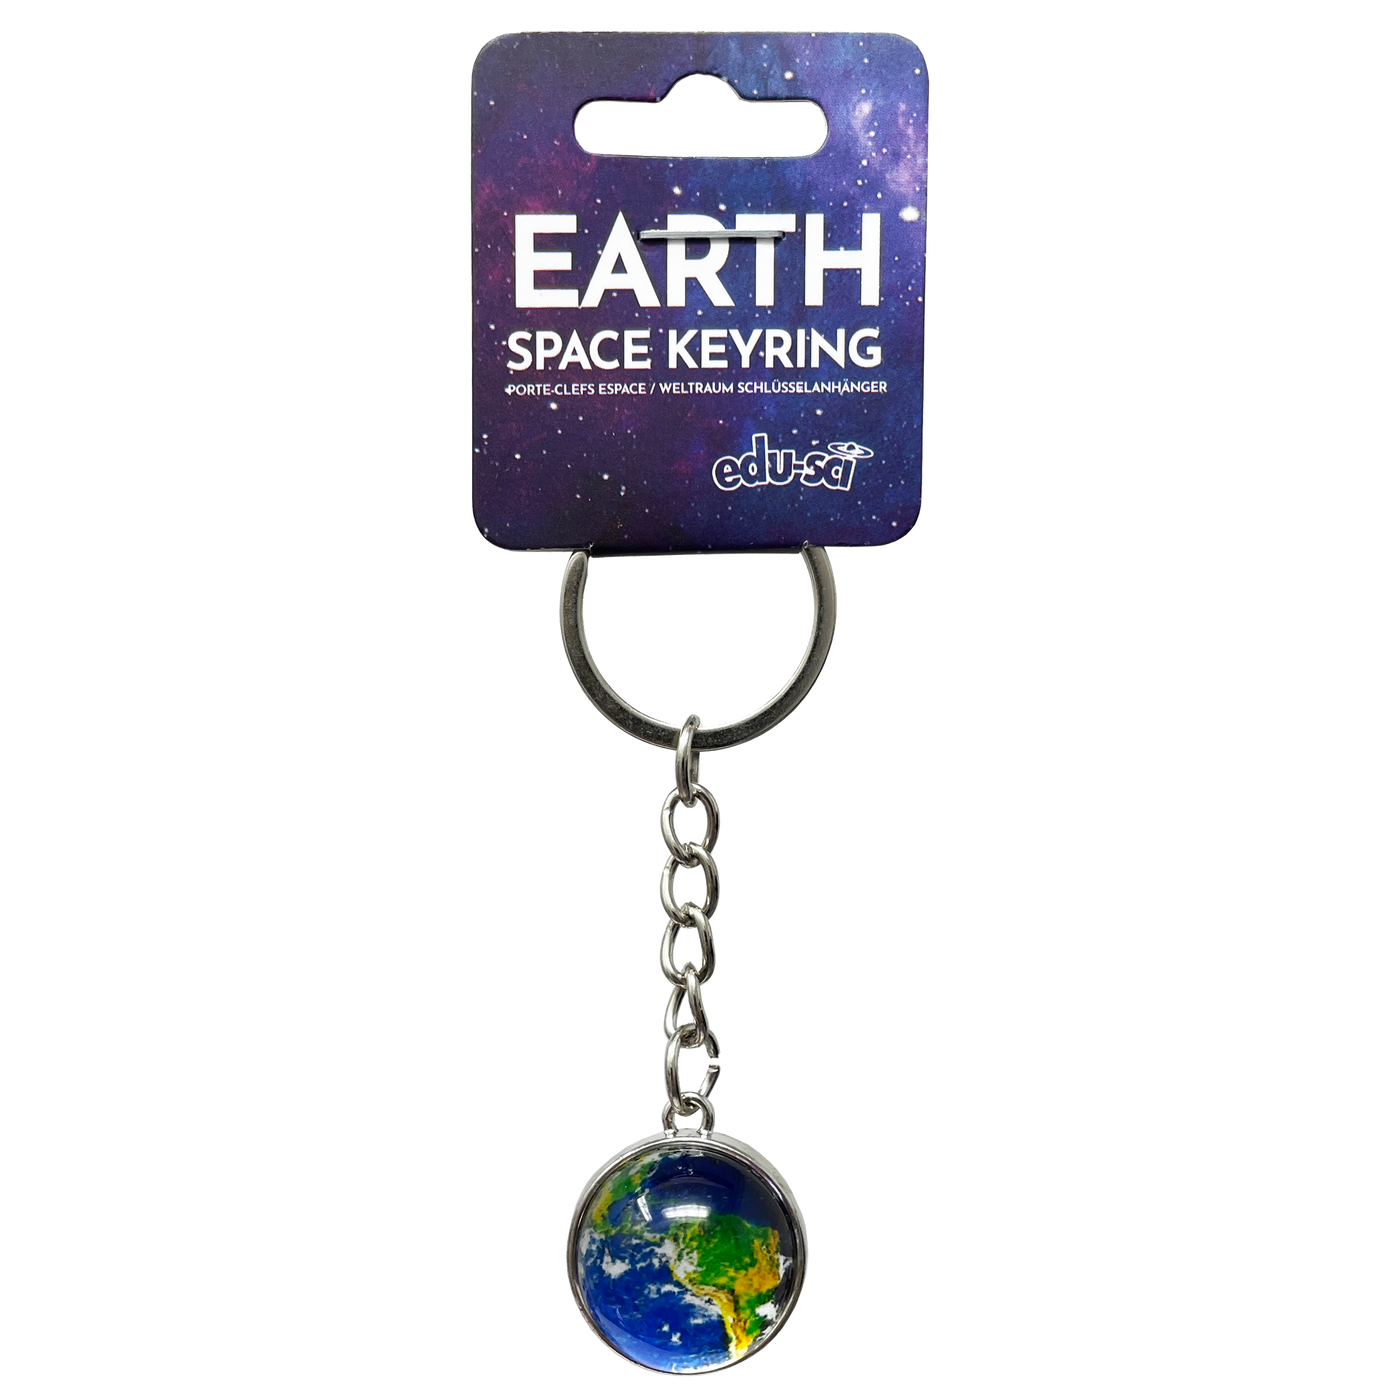 Earth Space Keyring